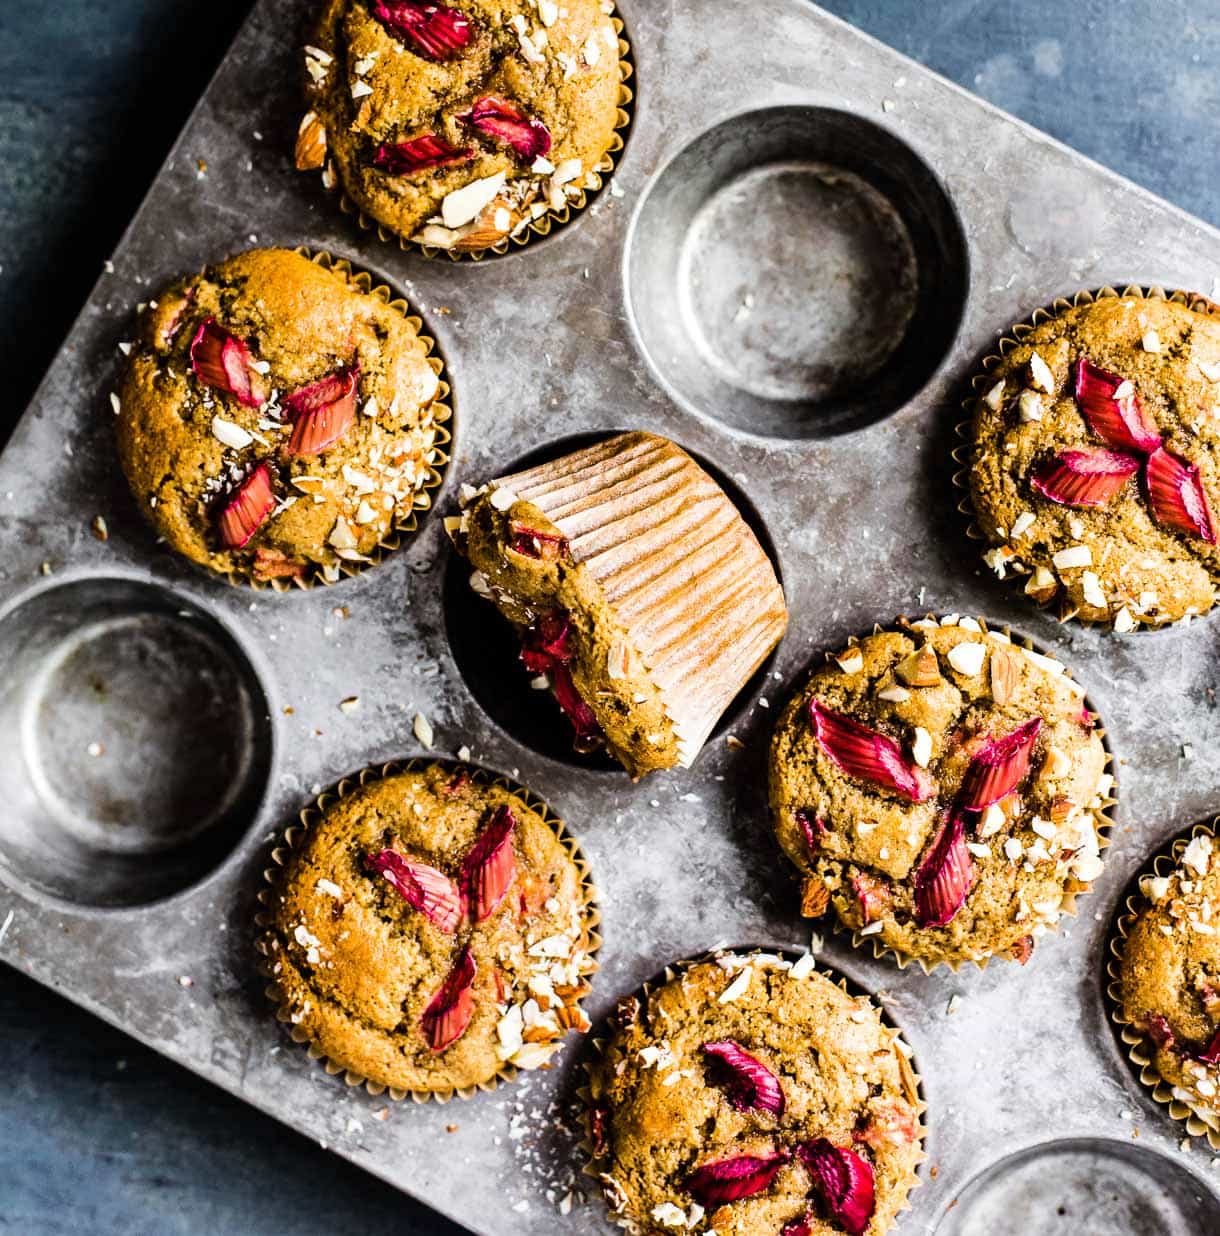 Easy Rhubarb Muffins made with almond flour